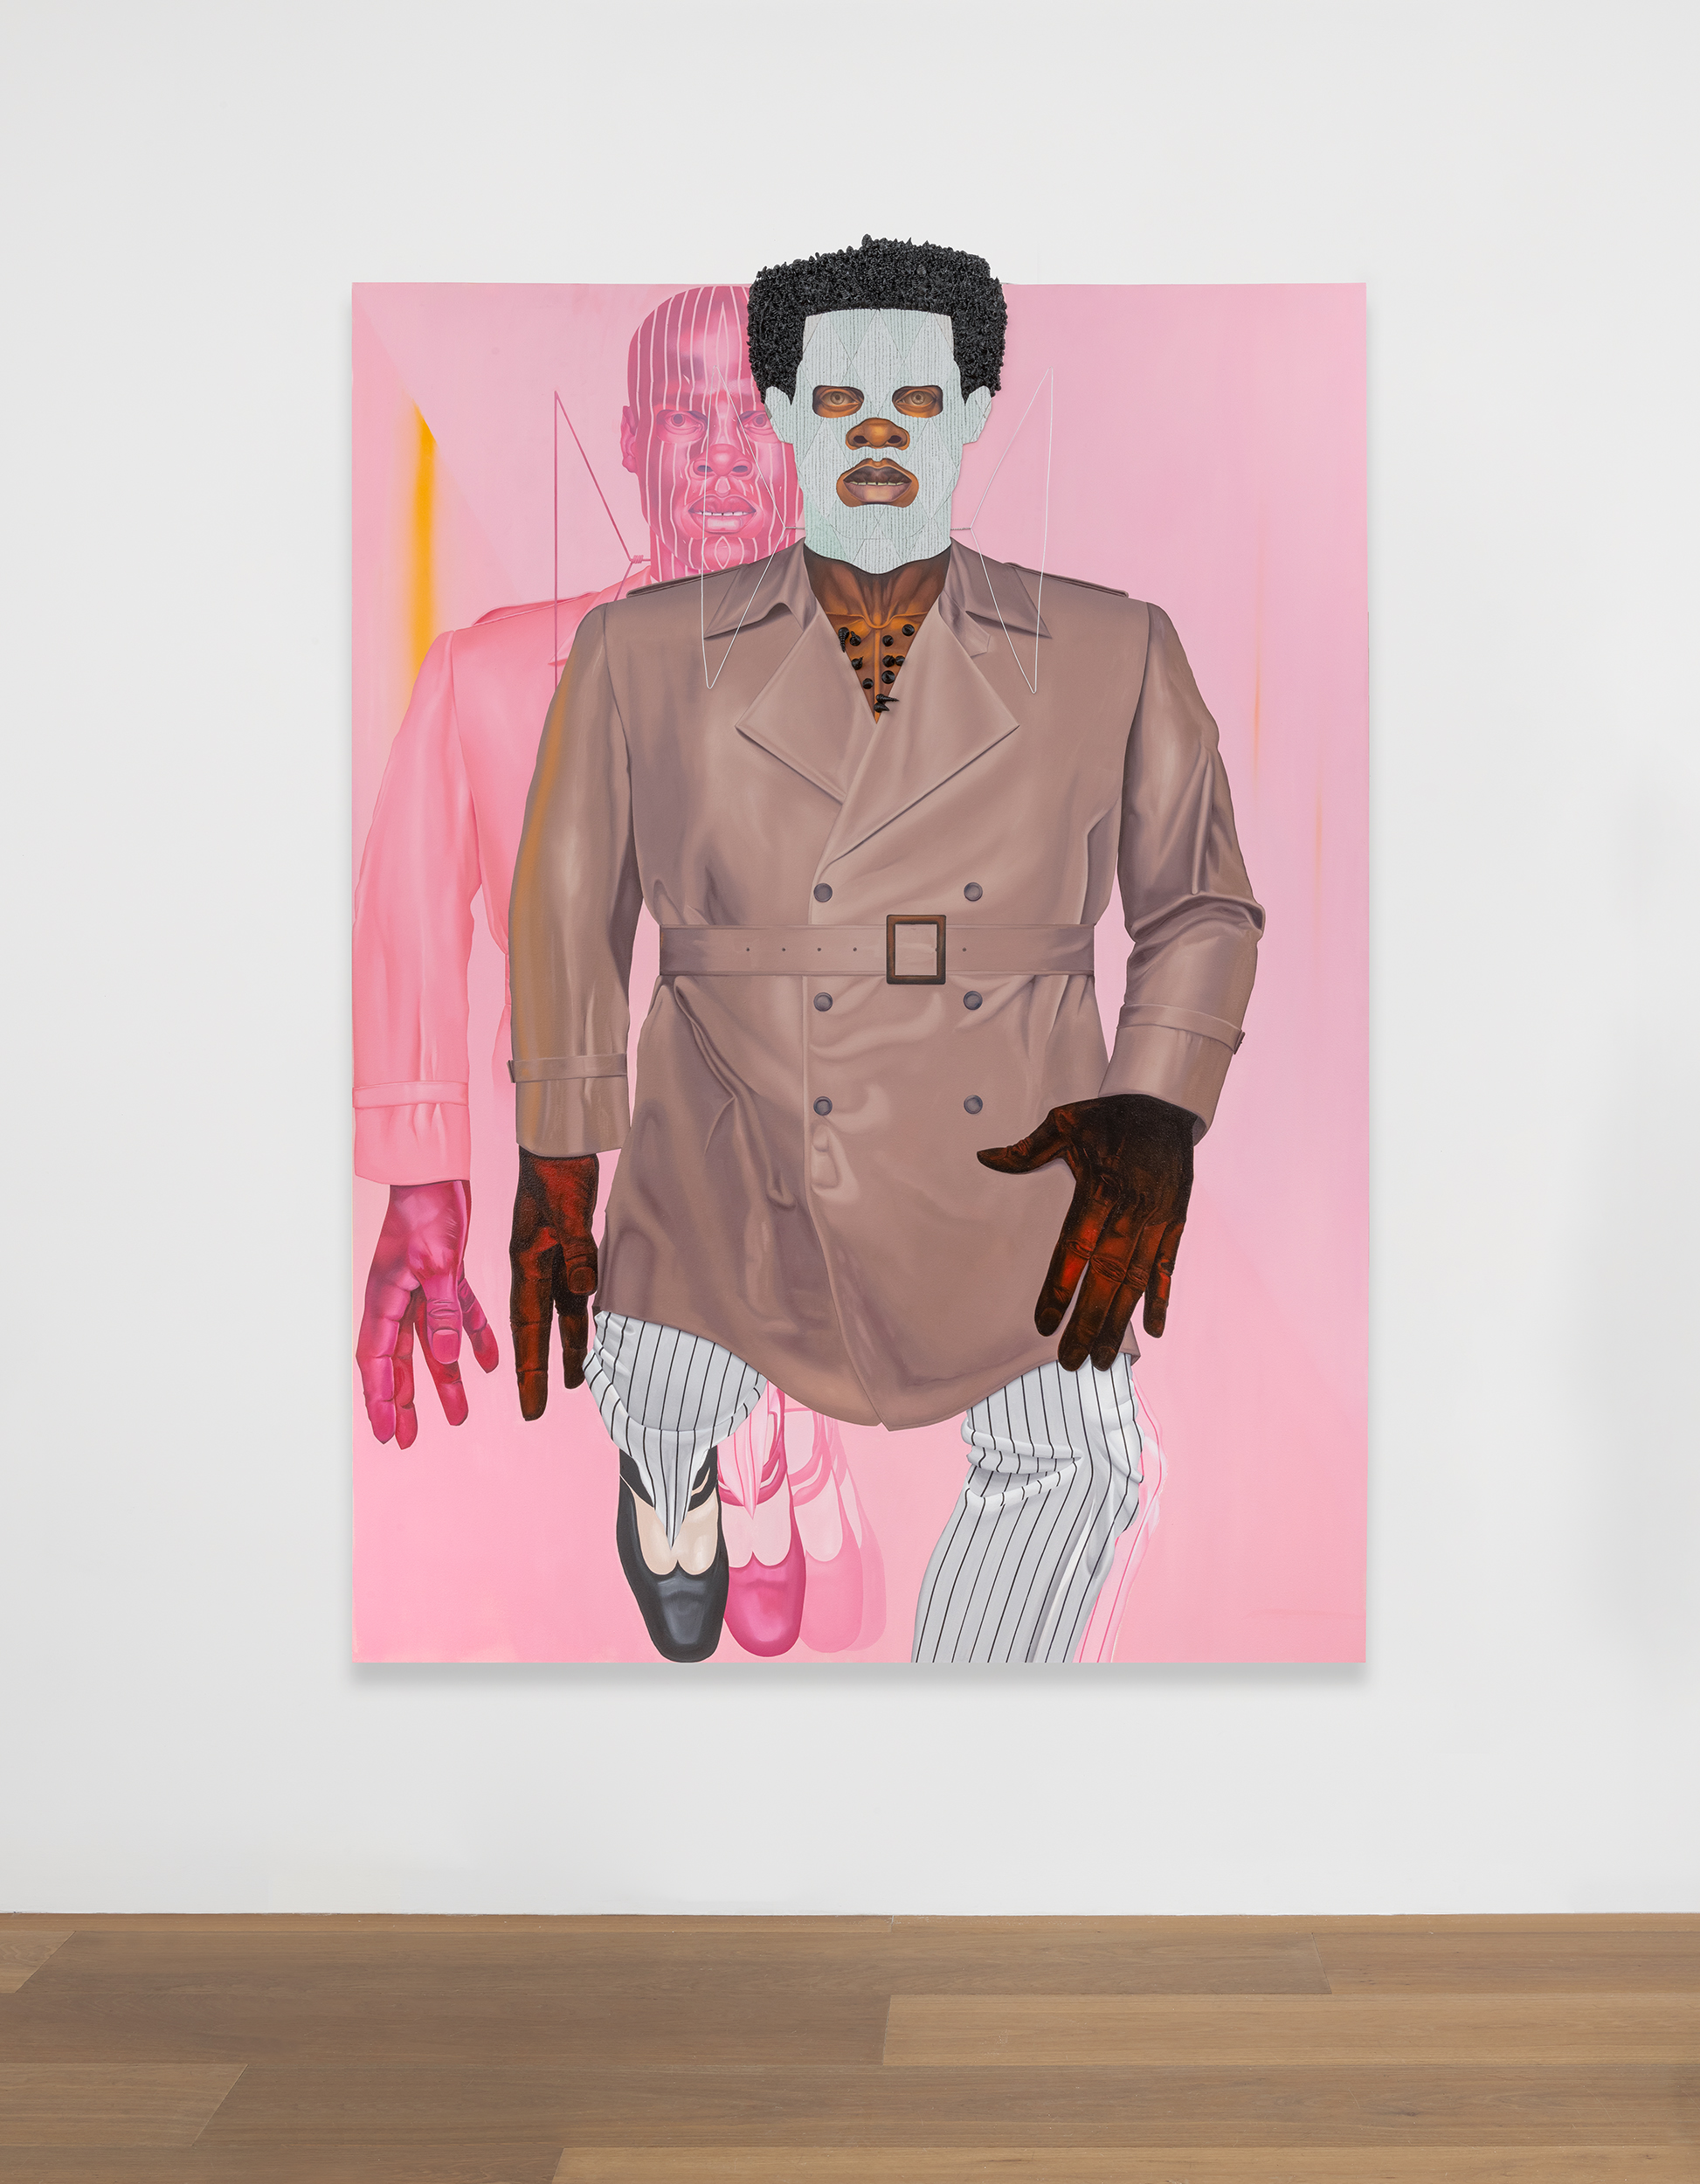 Installation view of Jeff Sonhouse's painting Untitled, 2021